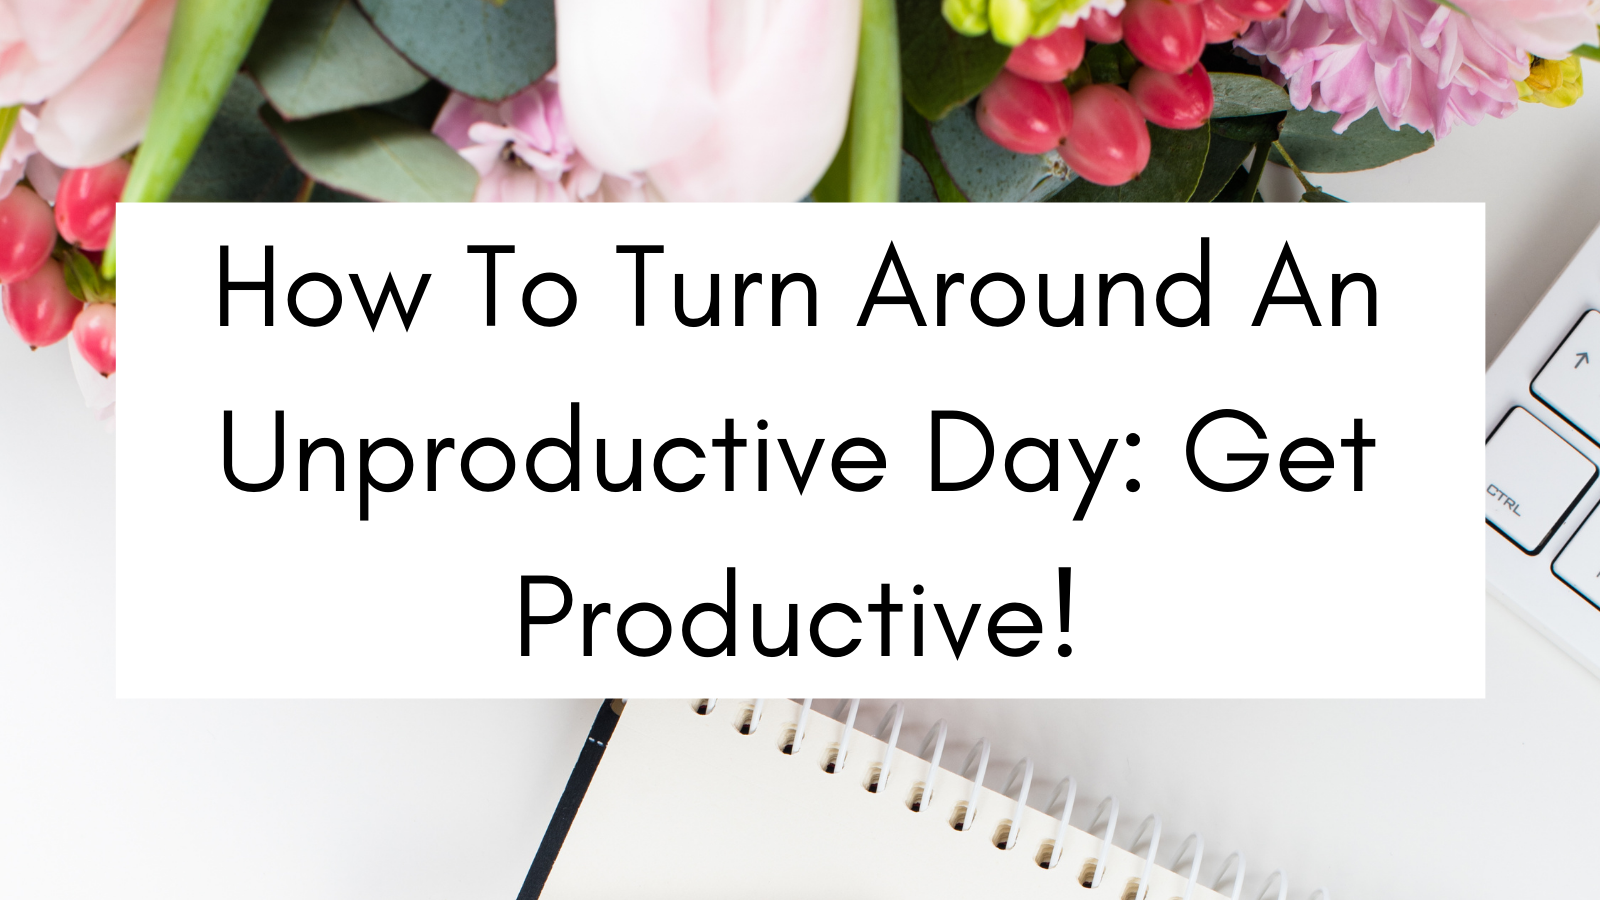 How To Turn Around An Unproductive Day: Get Productive!